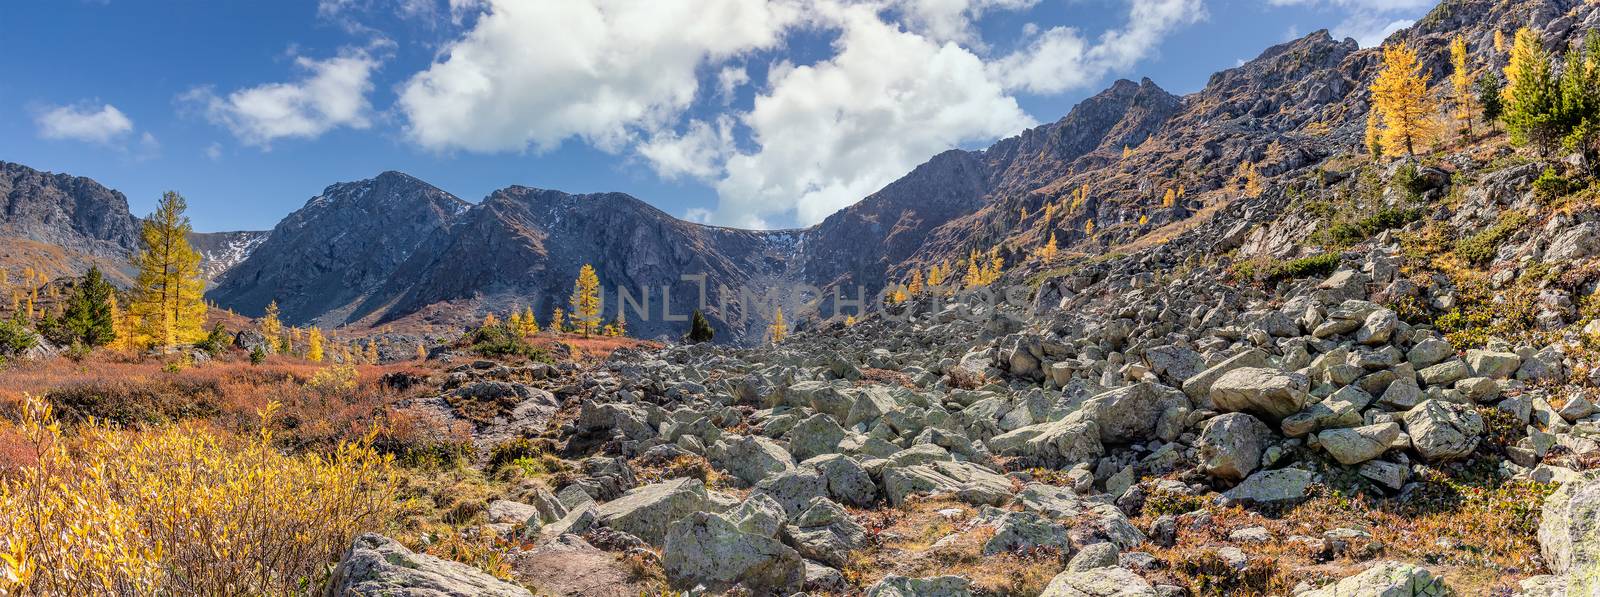 Altai mountains. Beautiful highland autumn panoramic landscape. Rocky foreground with golden trees. Blue cloudy sky as a background. Russia. Siberia by DamantisZ